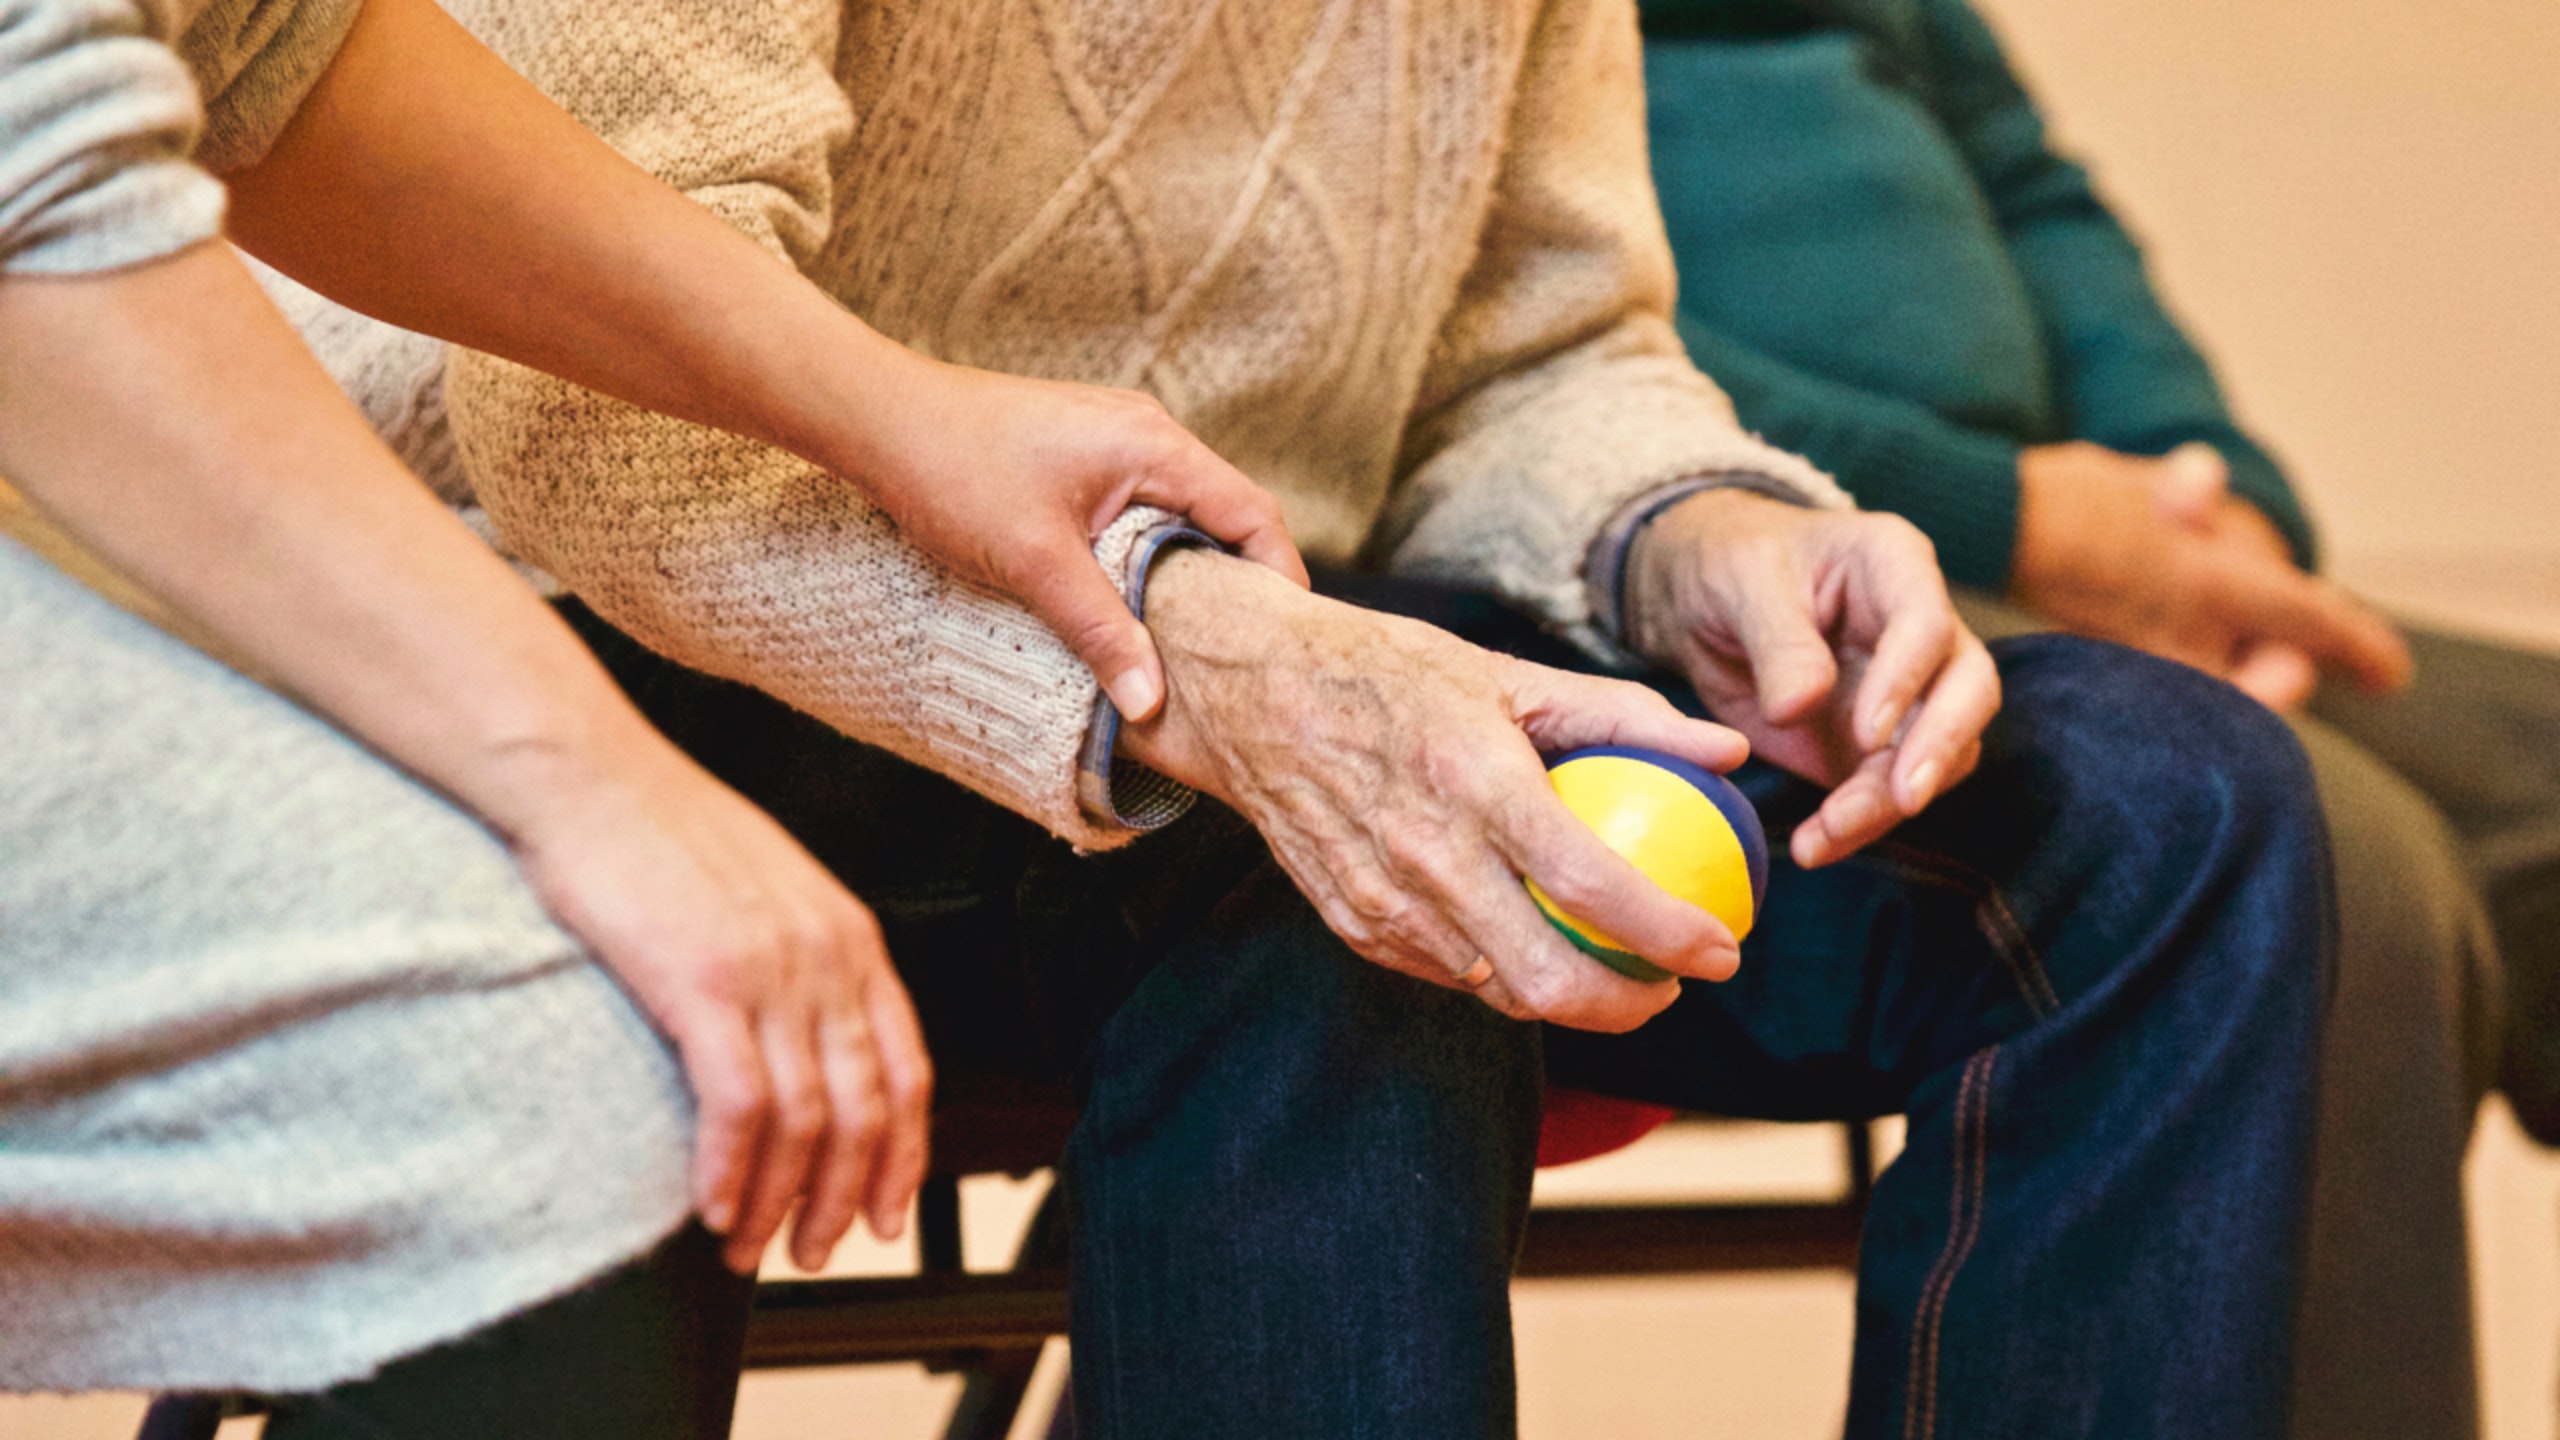 Caregivers deal with problems related to isolation, stress, and depression. It is important to learn how to prevent and treat these problems if they occur.